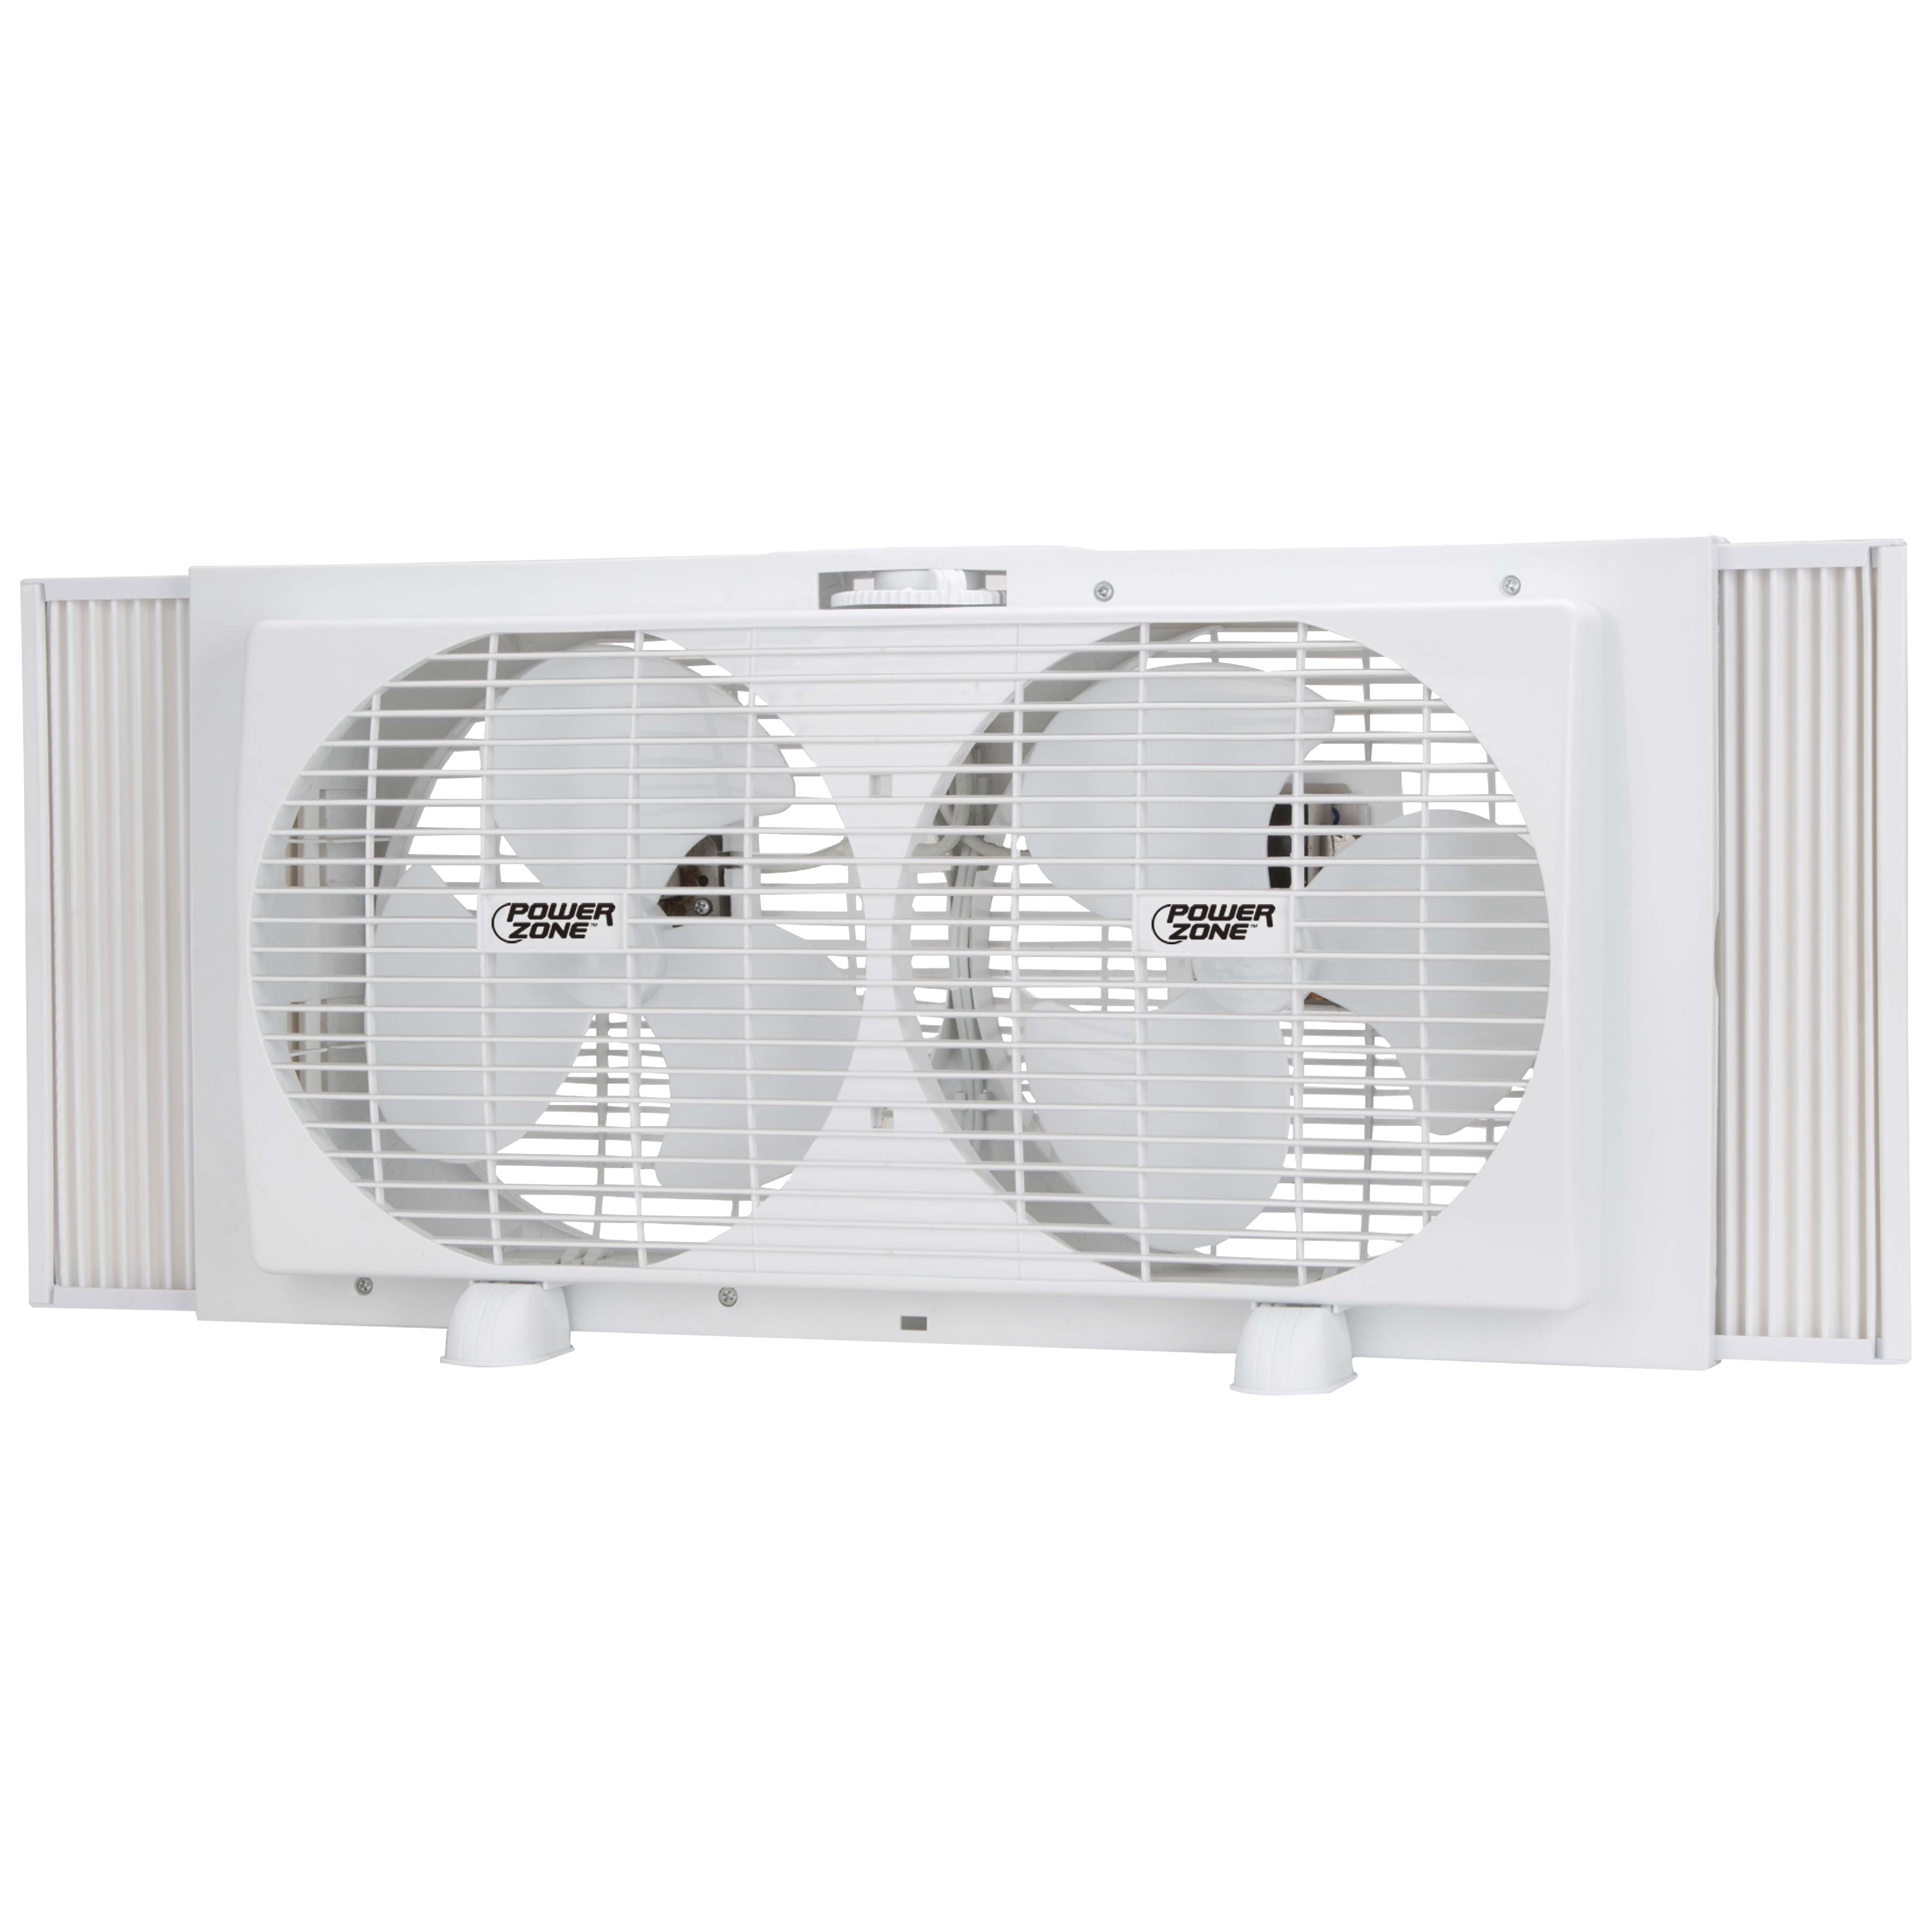 BP2-9 Fan, 120 V, 9 in Dia Blade, 6-Blade, 2-Speed, Rotary Control Control, Window Mounting, White